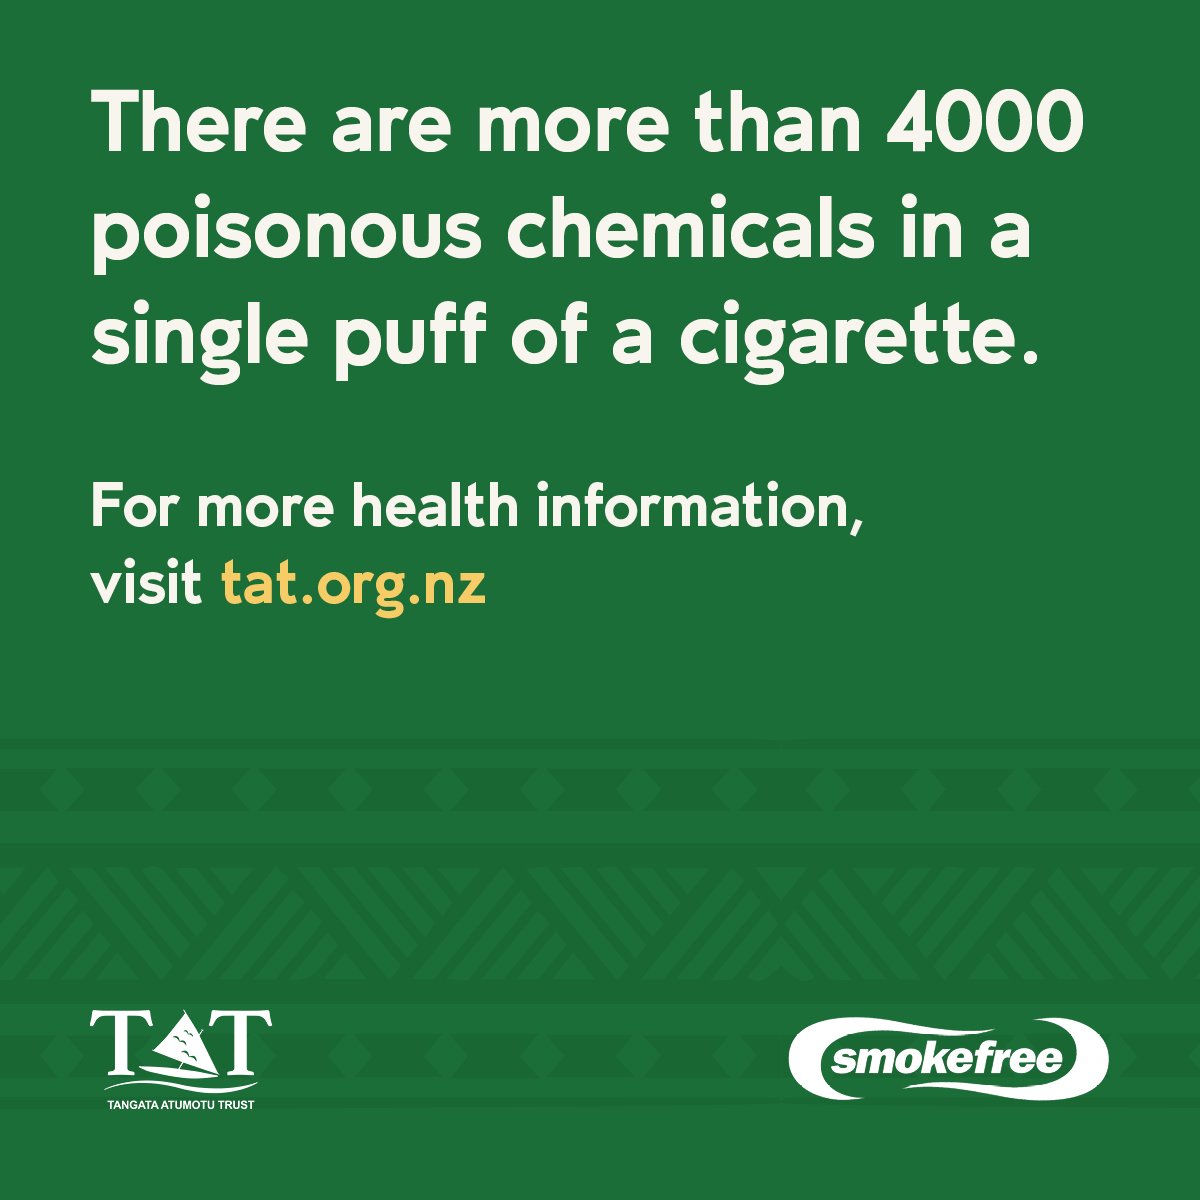 Starting a smokefree journey can be difficult, but we're here to help🌺

📞 Call our Smokefree Practitioner Bale Vuadreu, on 0800 PASIFIKA (727 434) to talanoa about quitting this habit. 

#Pasifika #Health #SmokefreeMay